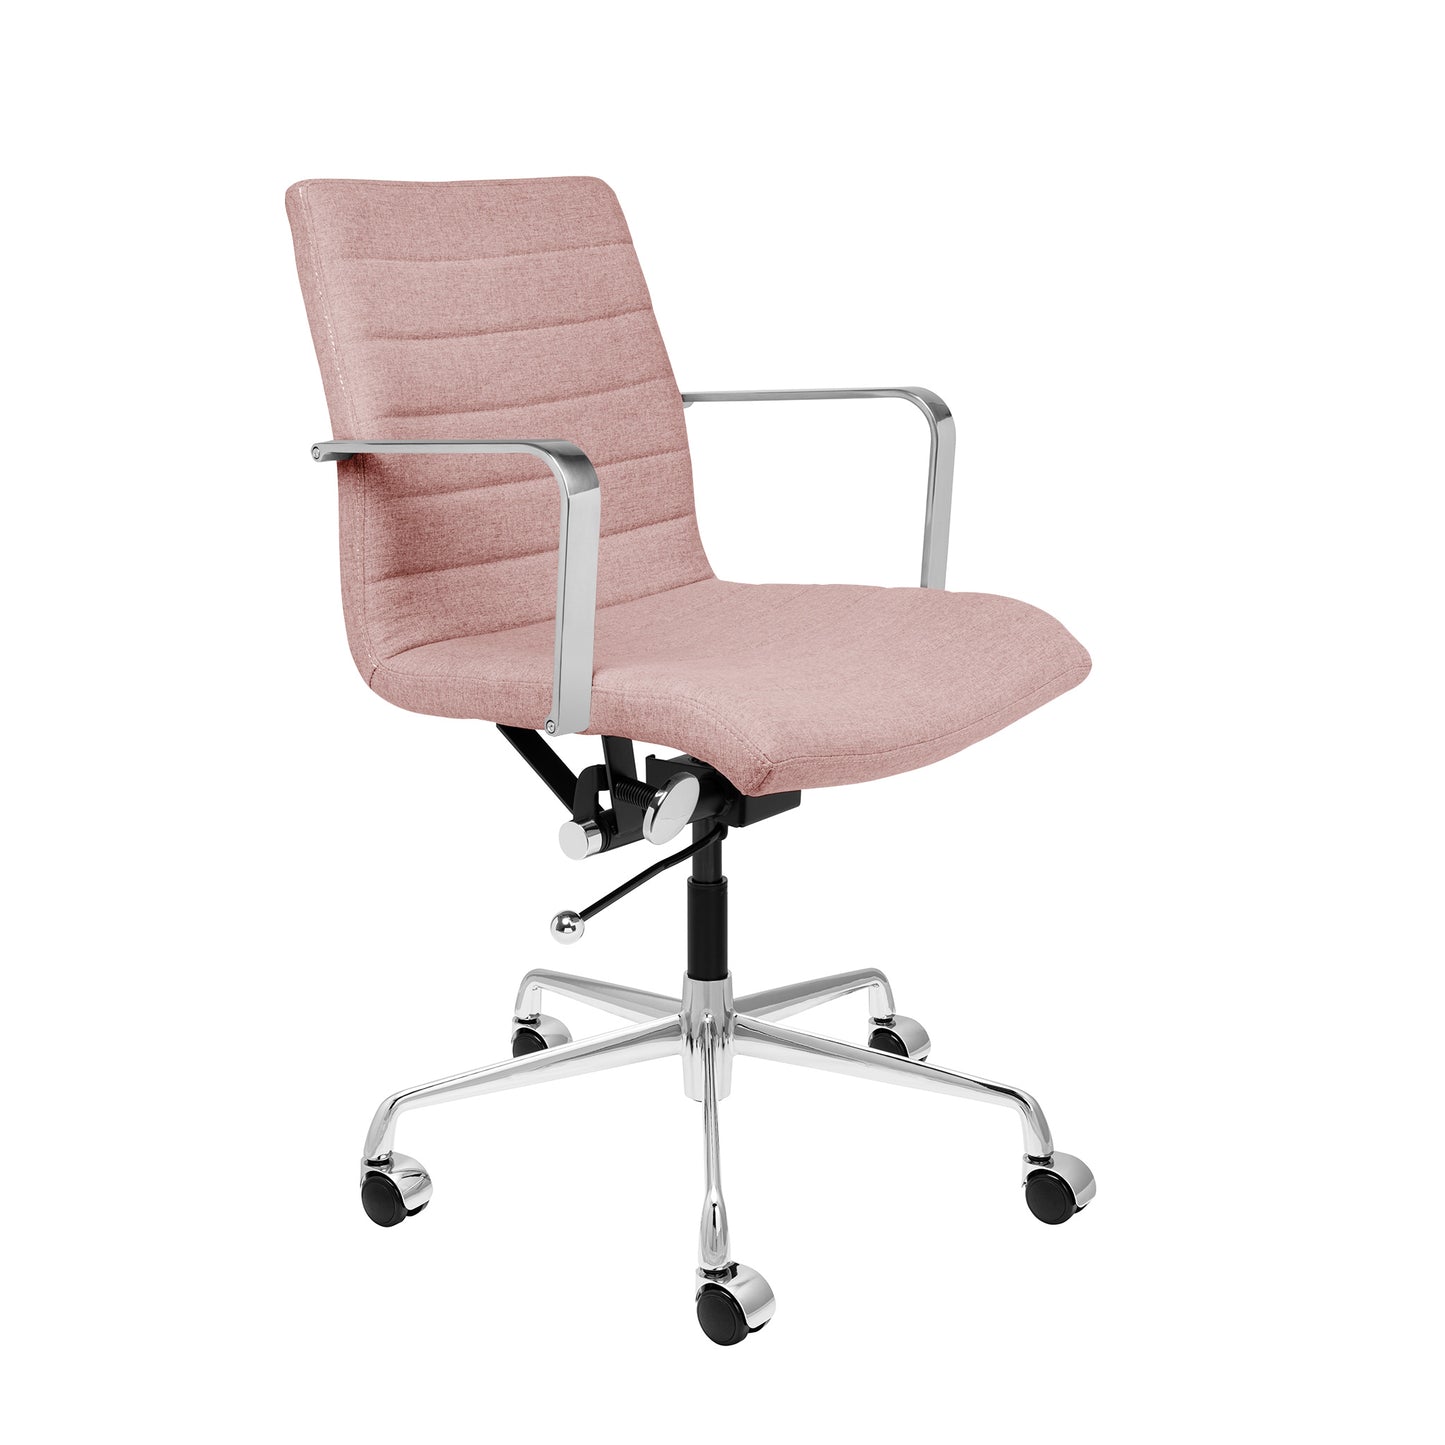 SOHO II Ribbed Management Chair (Coral Pink Fabric)